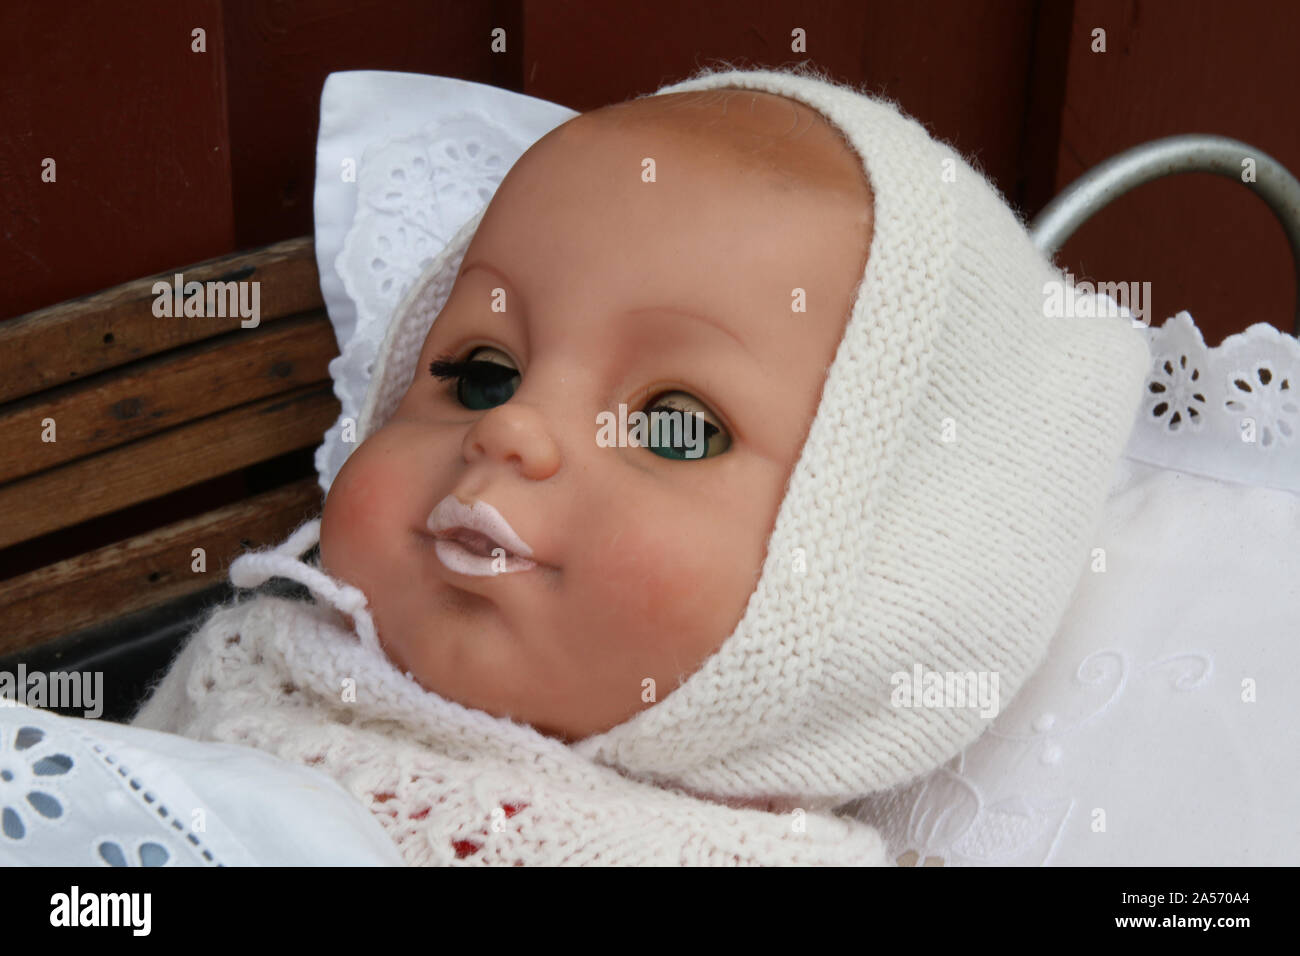 Baby doll in warm clothes Stock Photo